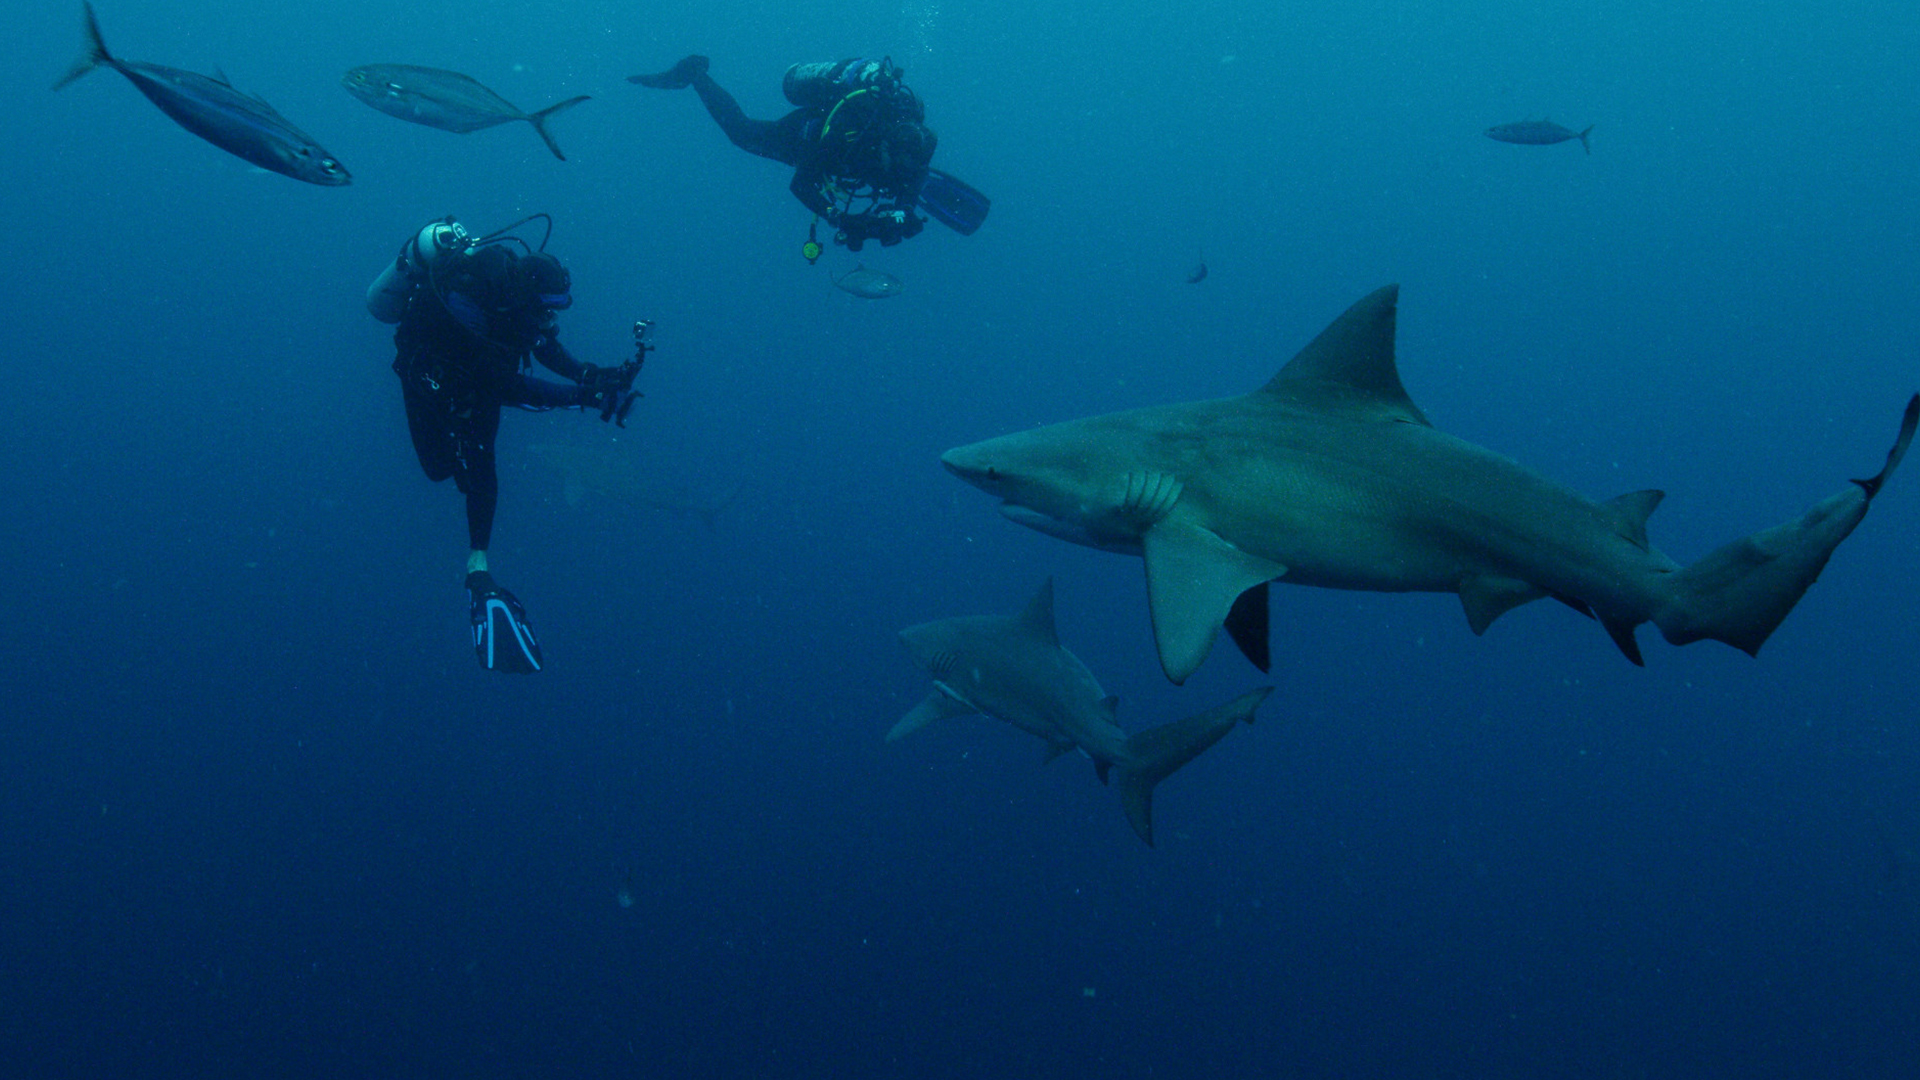 Dr. Mike Heithaus and Sara Casareto record some sharks underwater. This is part of Jaws vs. Boats. [Photo of the day - July 2022]